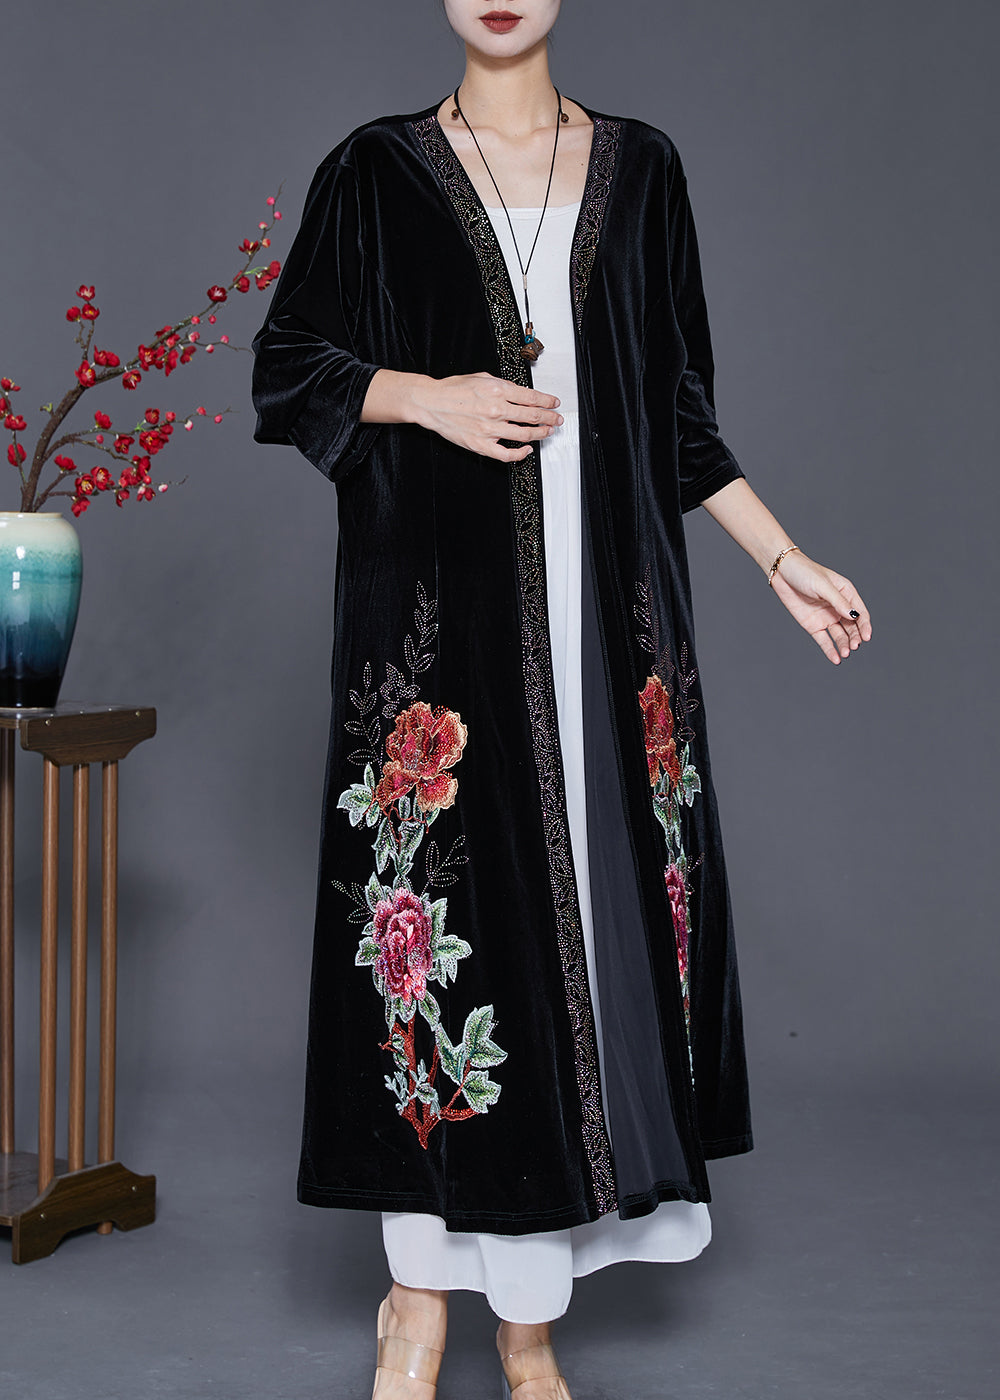 Style Black Embroideried Oversized Silk Velour Long Cardigan Fall